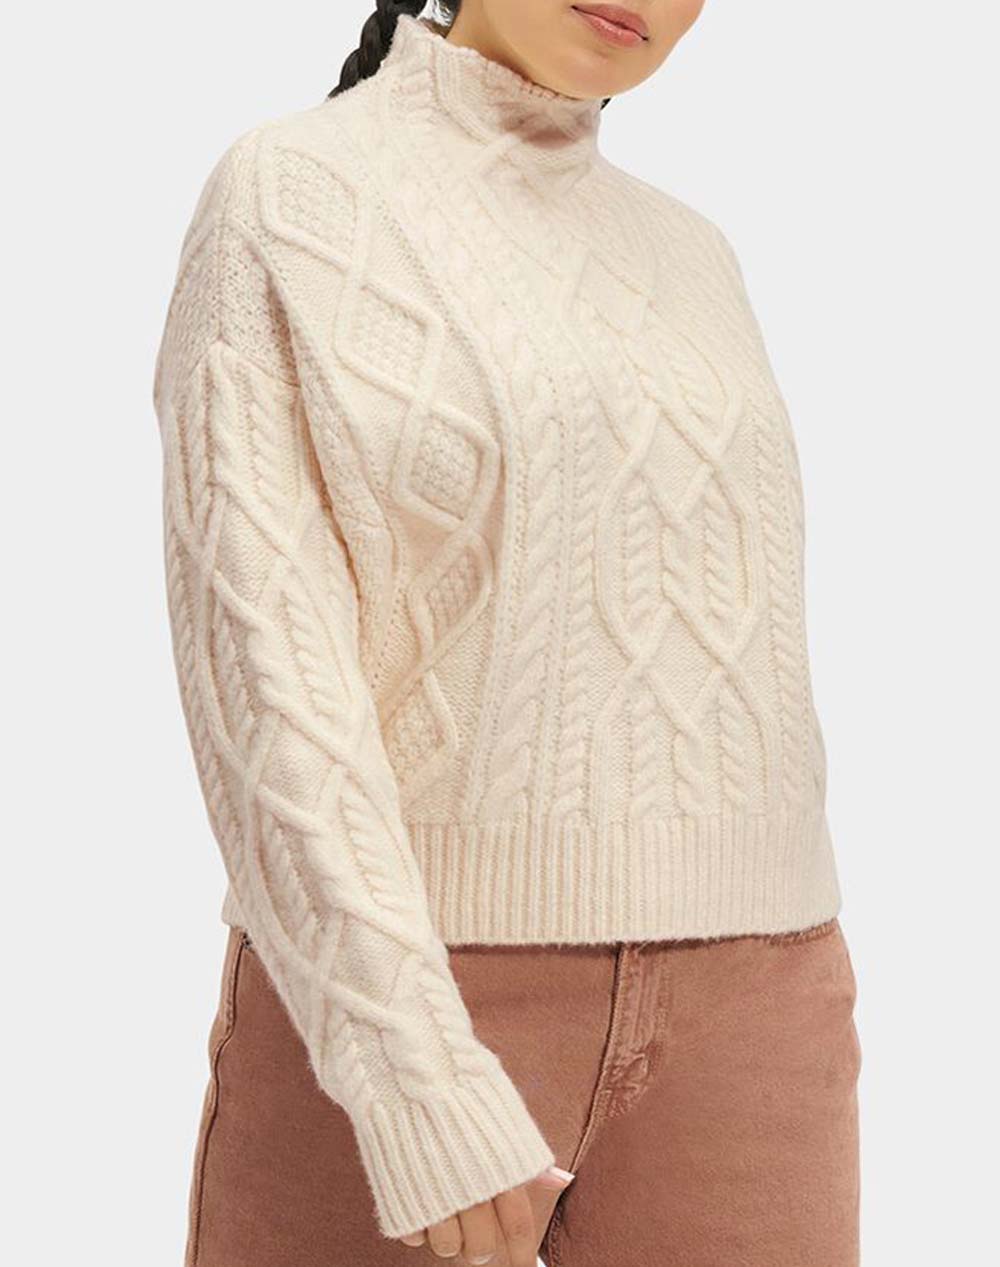 UGG Janae Cable Knit Sweater Short 1131508-00E2 Cream 3510A0UGG3420005_XR09964